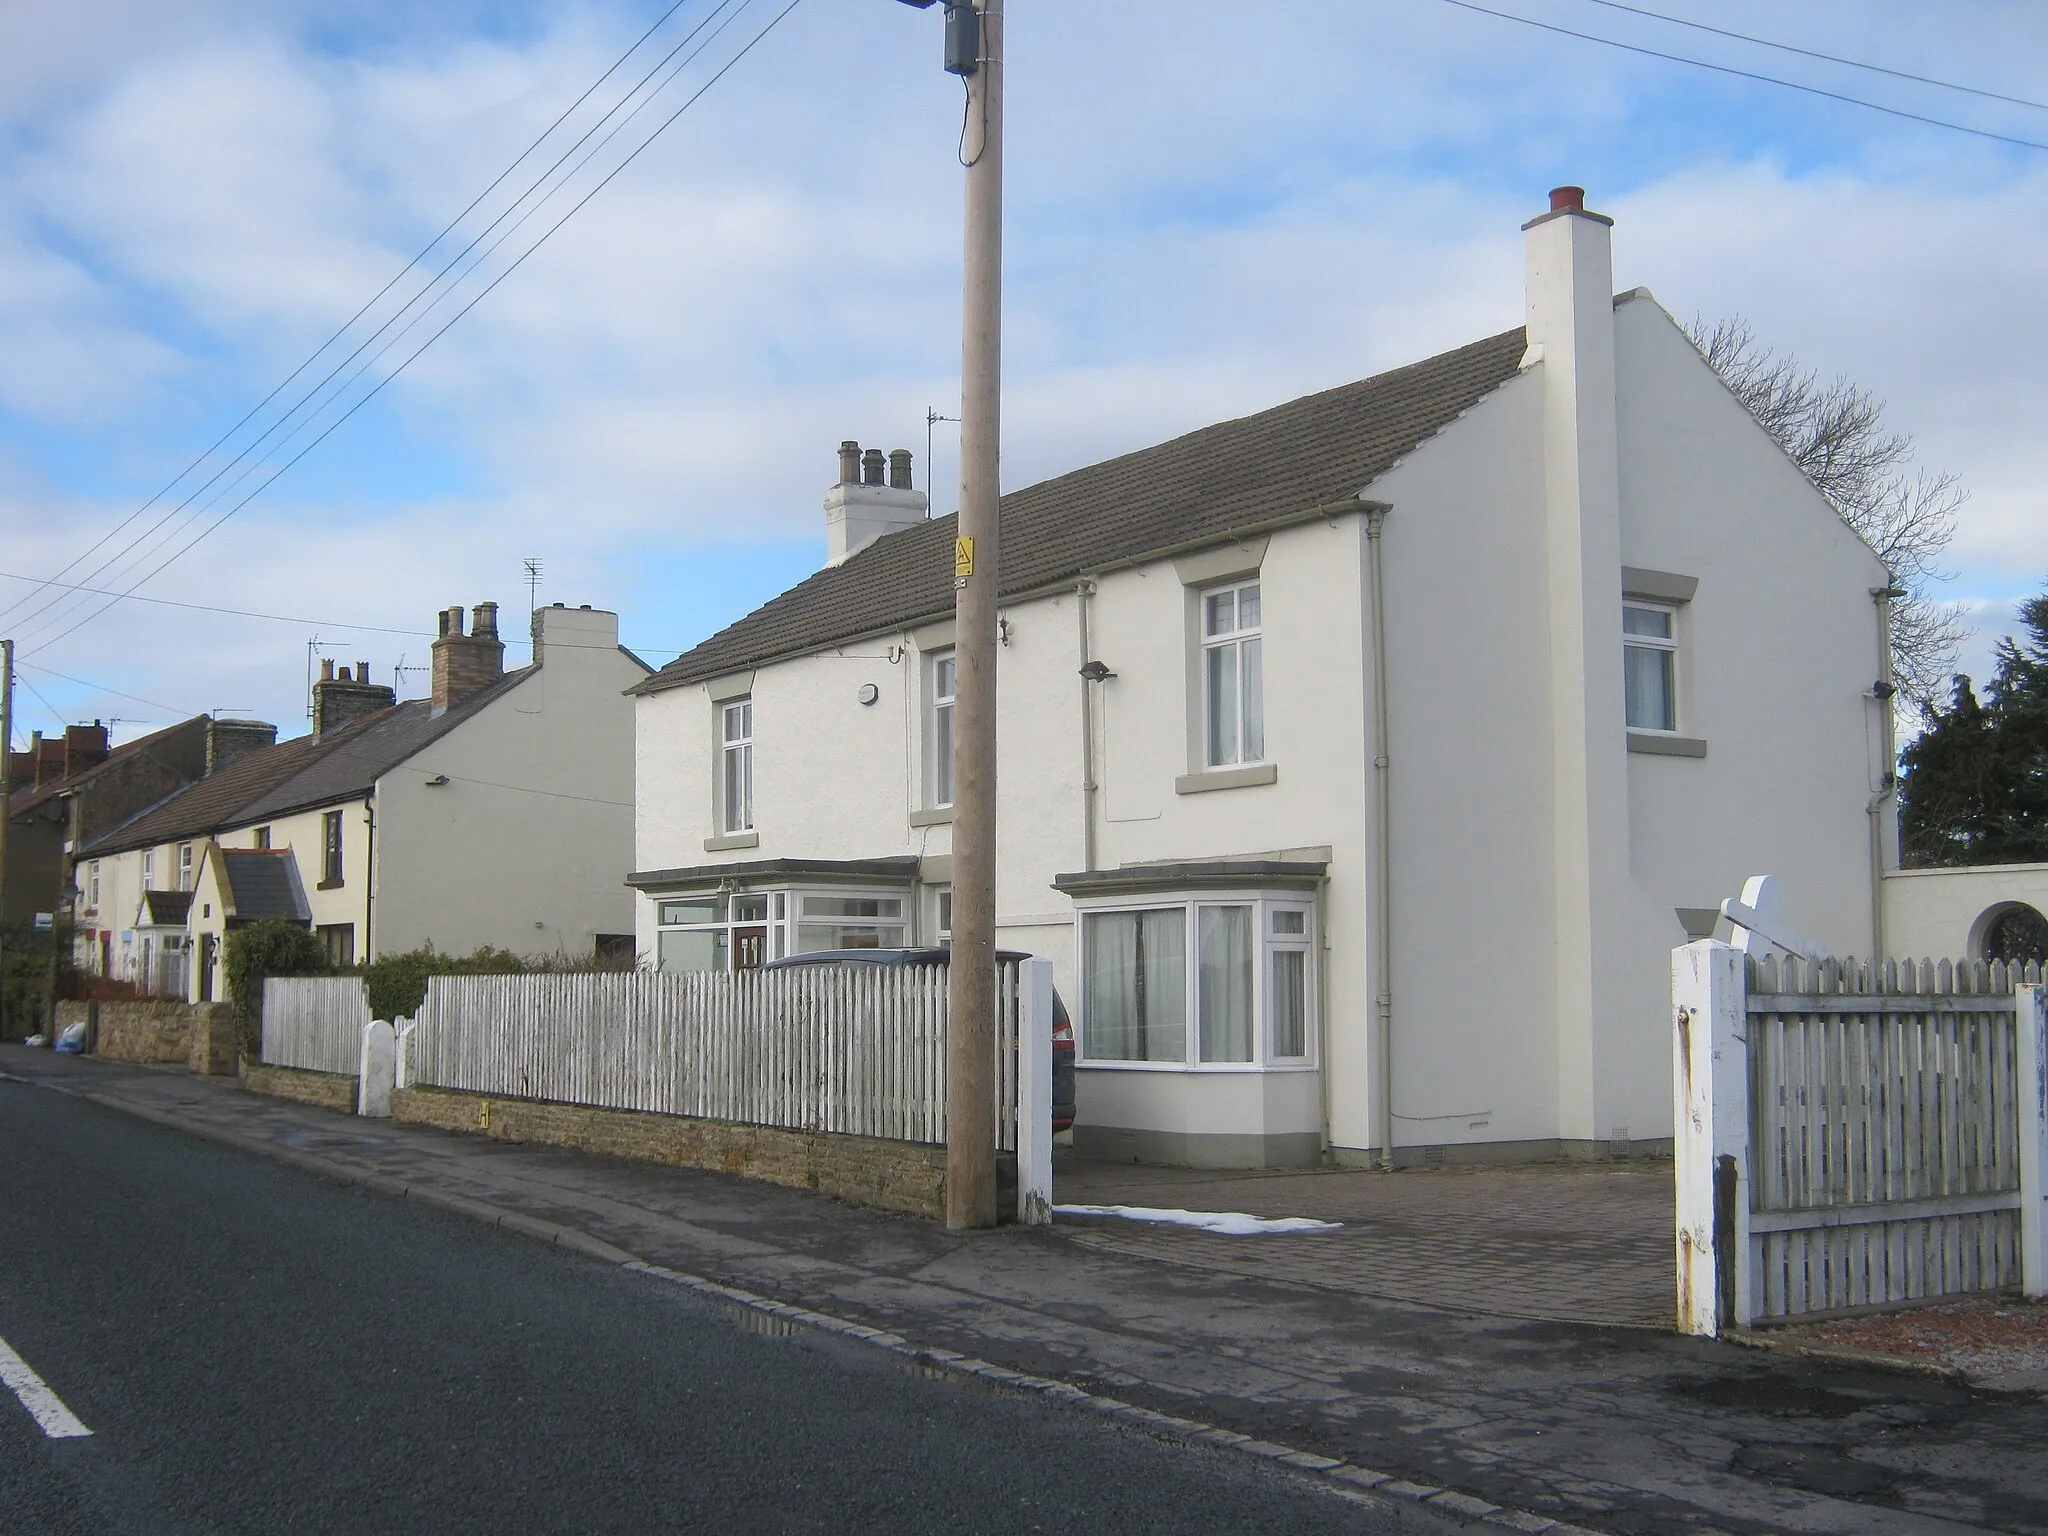 Photo showing: Residences in Etherley Road (B6282) at Low Etherley